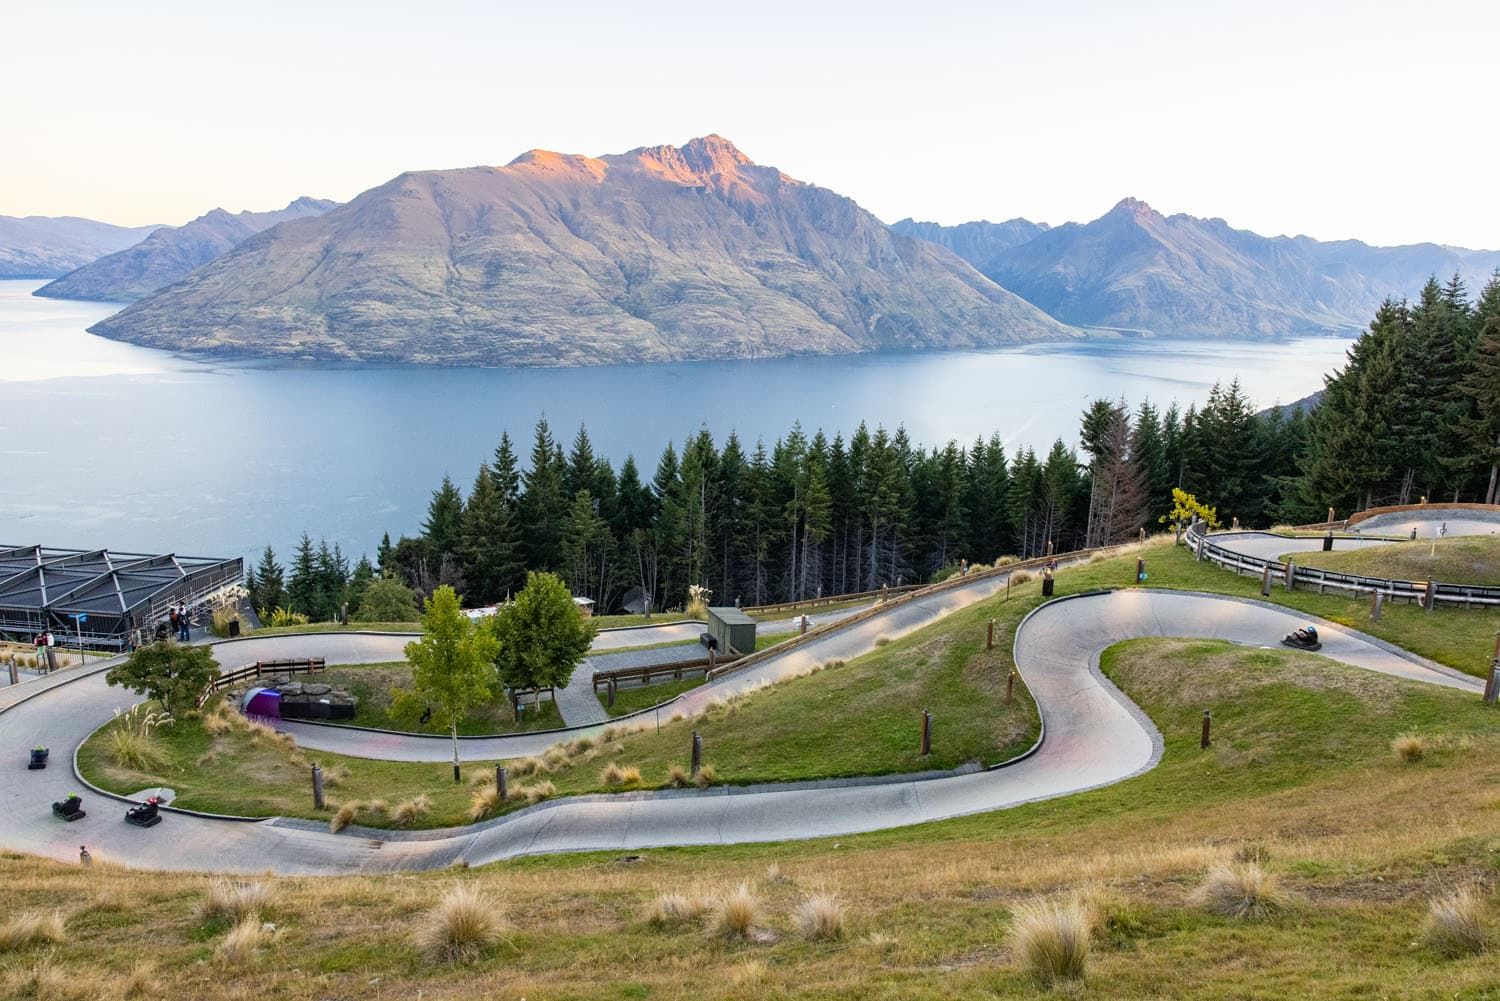 Skyline Queenstown Luge Track | Best Things to Do on the South Island